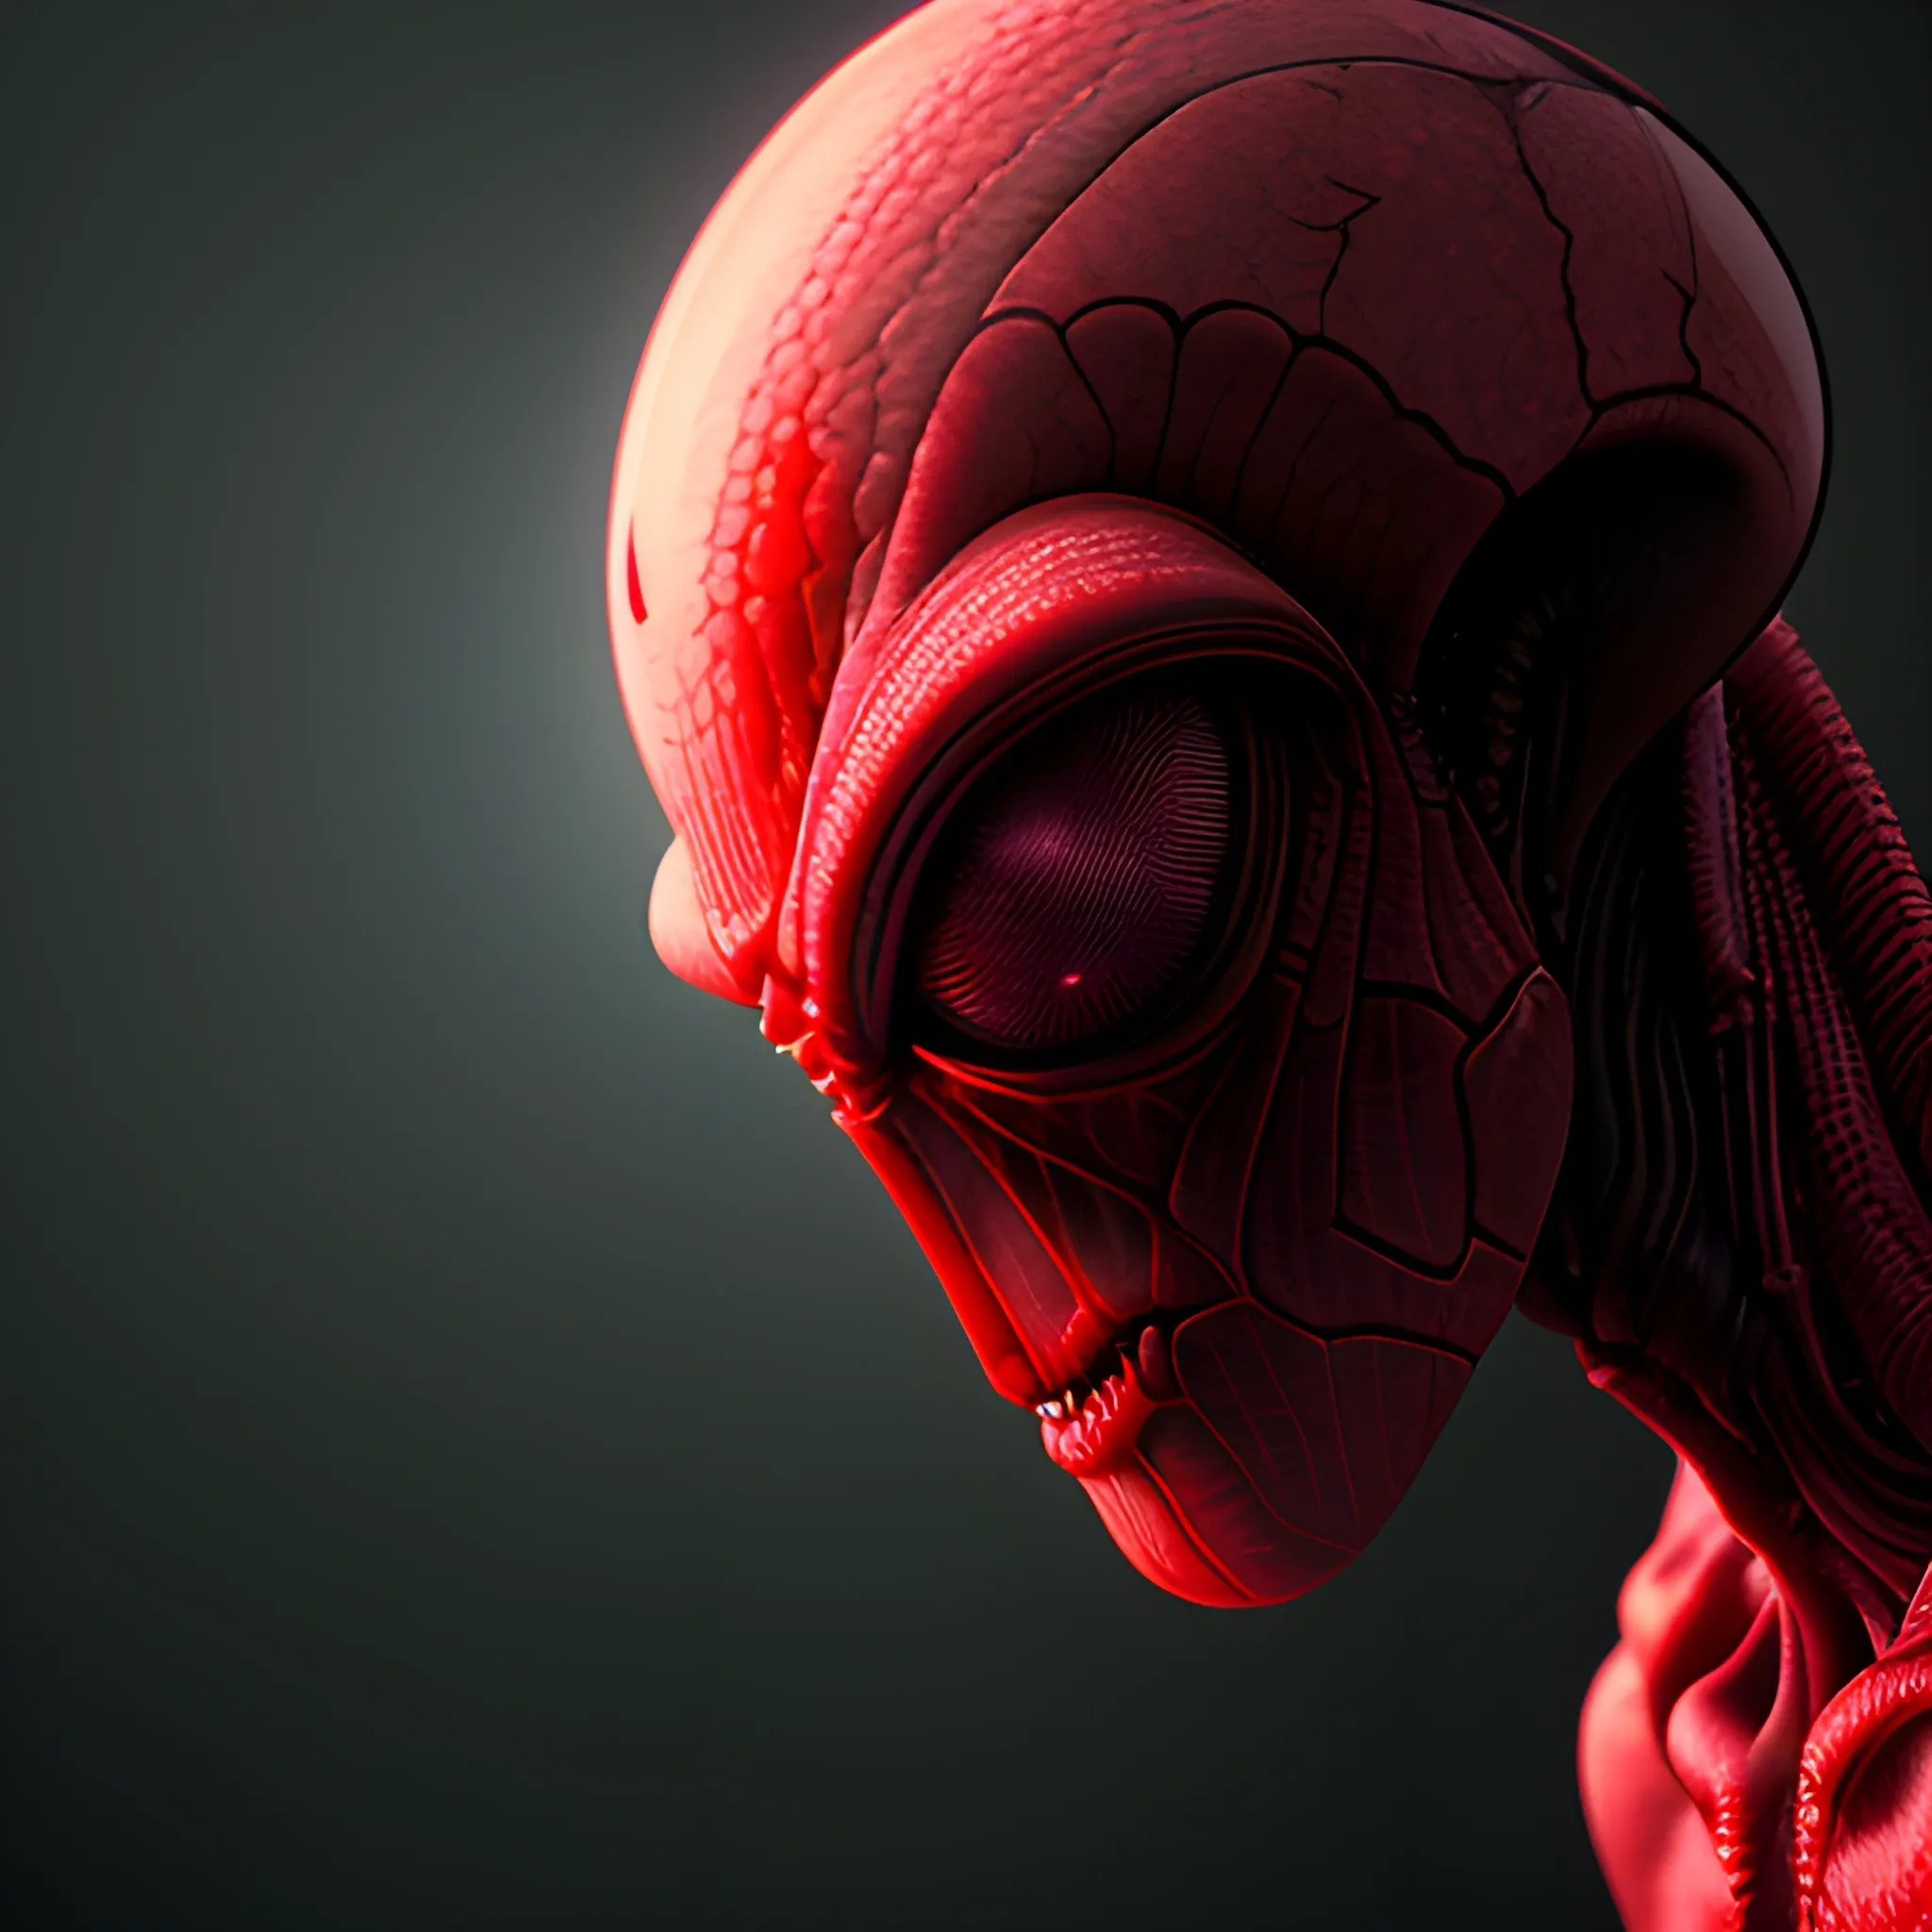 A high resolution, cinematic sideprofile photo of a alien with spider legs coming put of it's head, red eyes